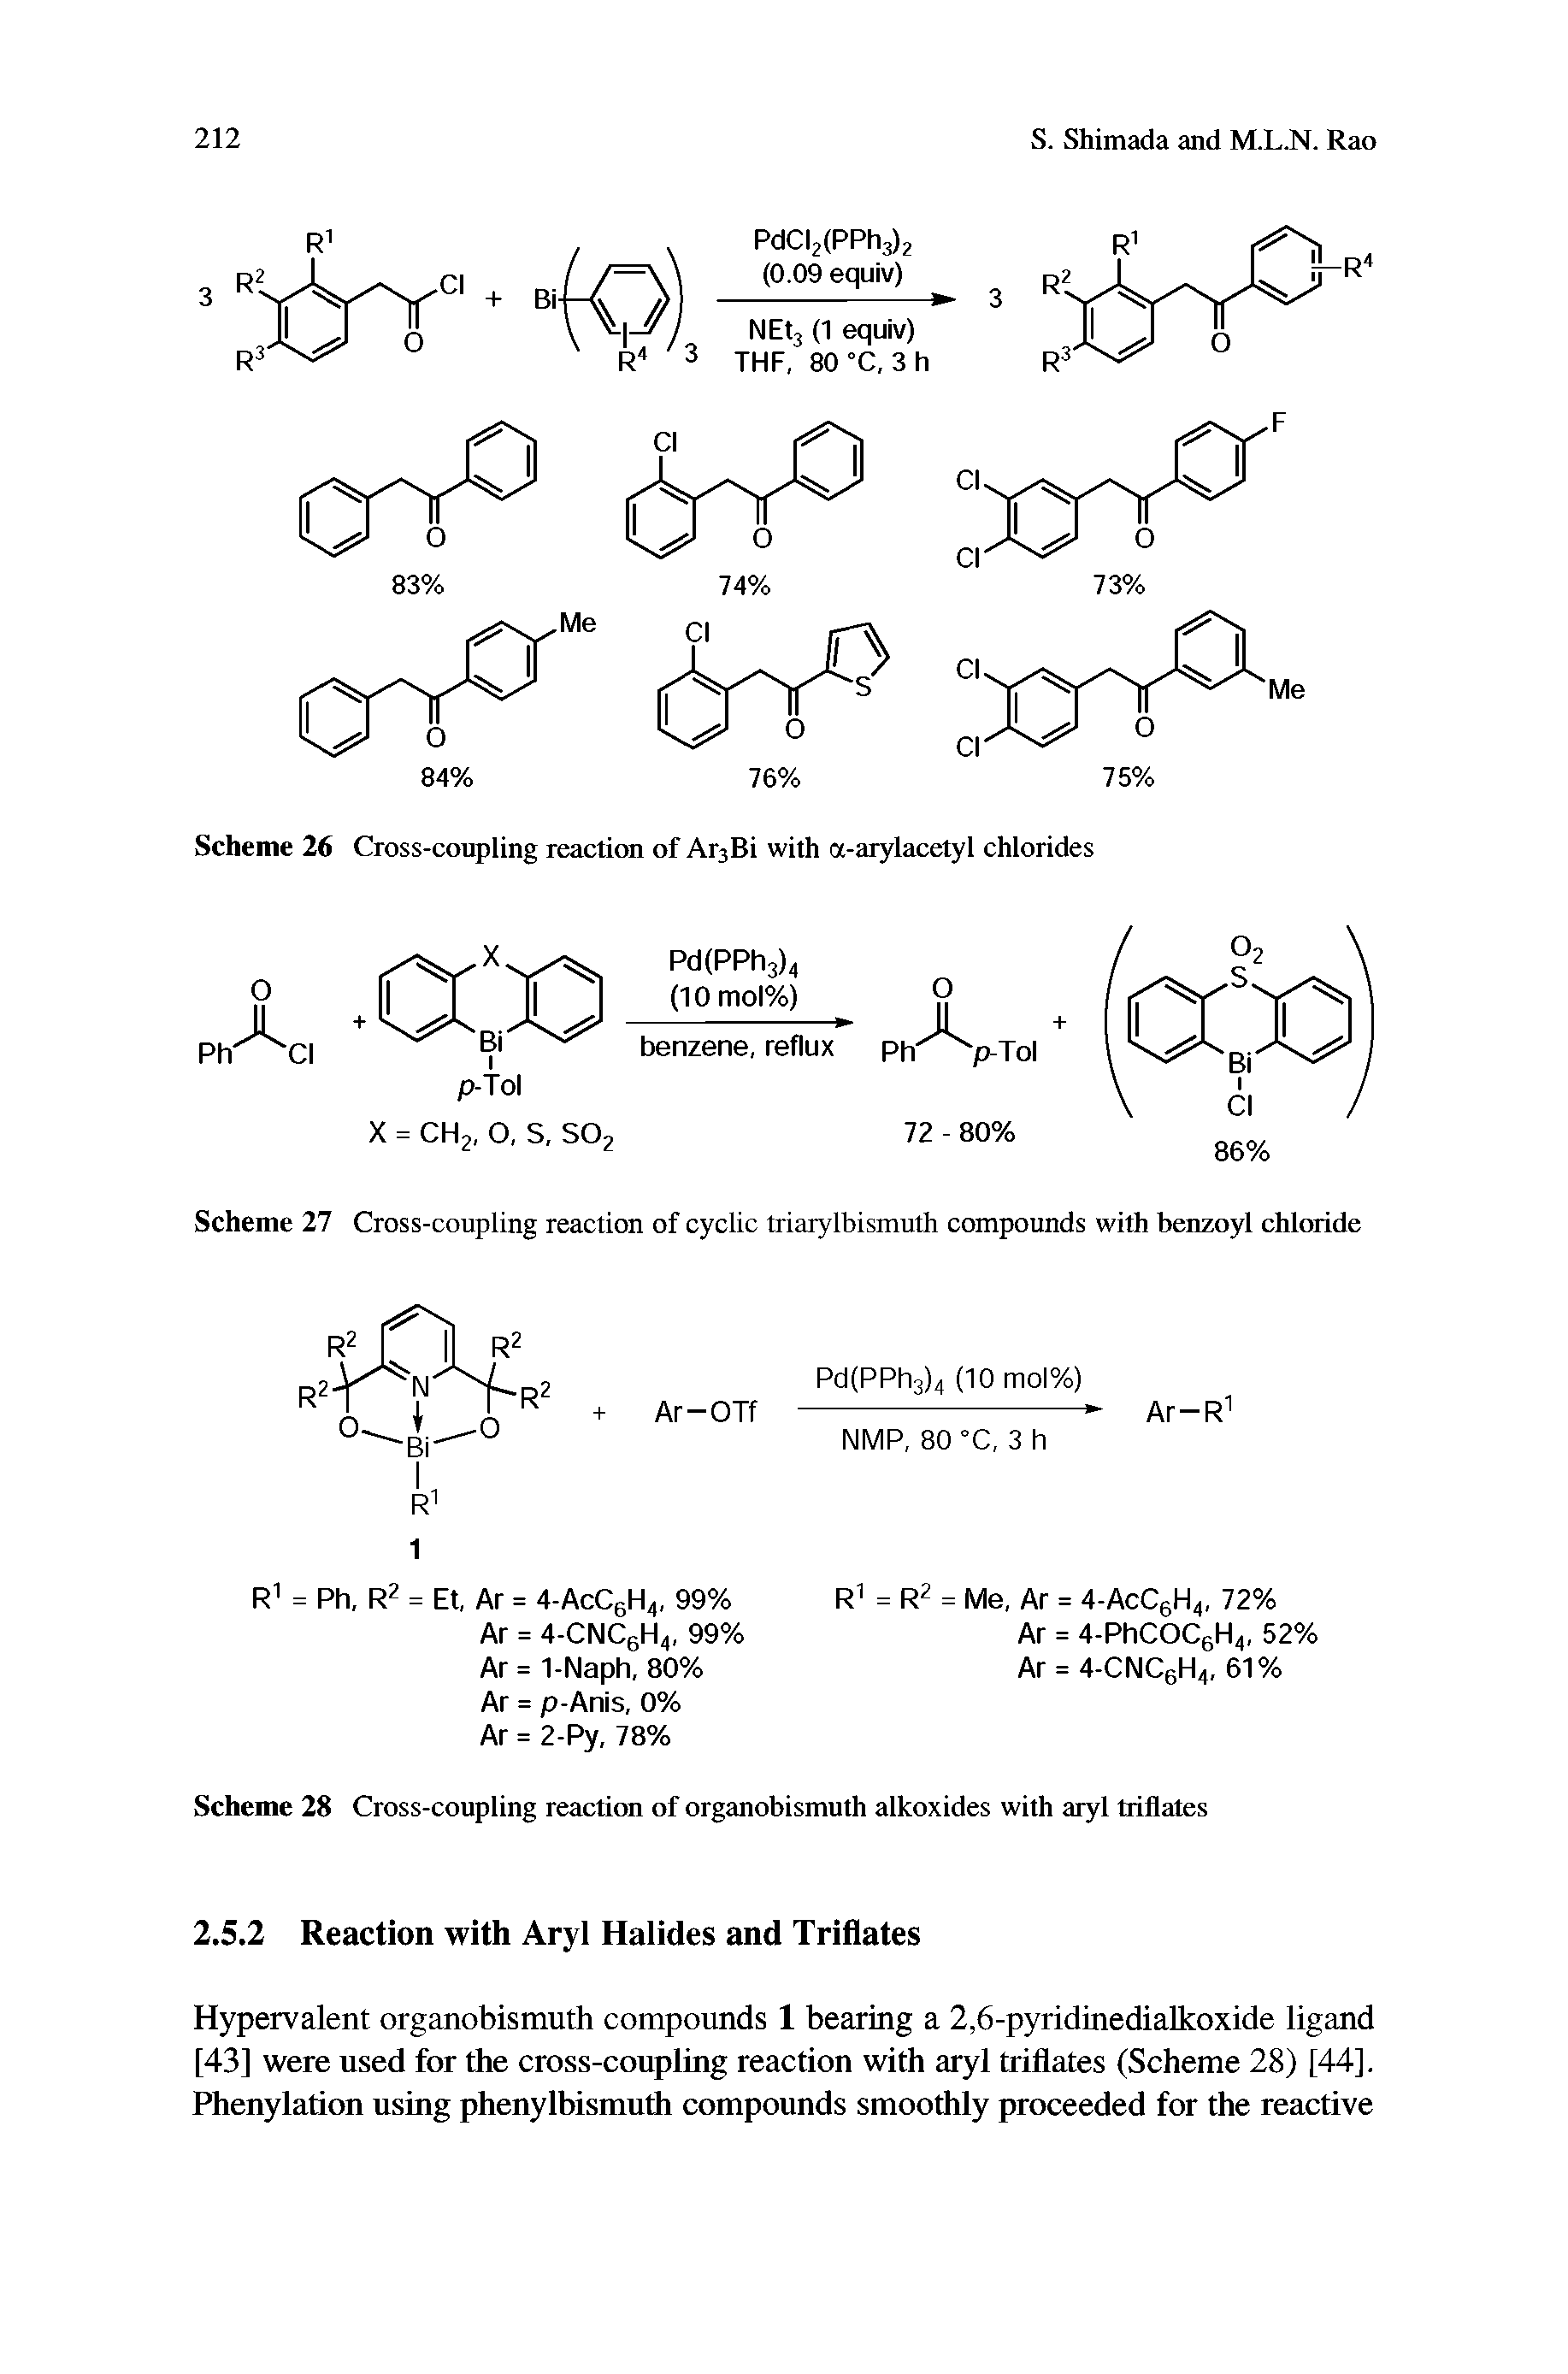 Scheme 28 Cross-coupling reaction of organobismuth alkoxides with aryl triflates...